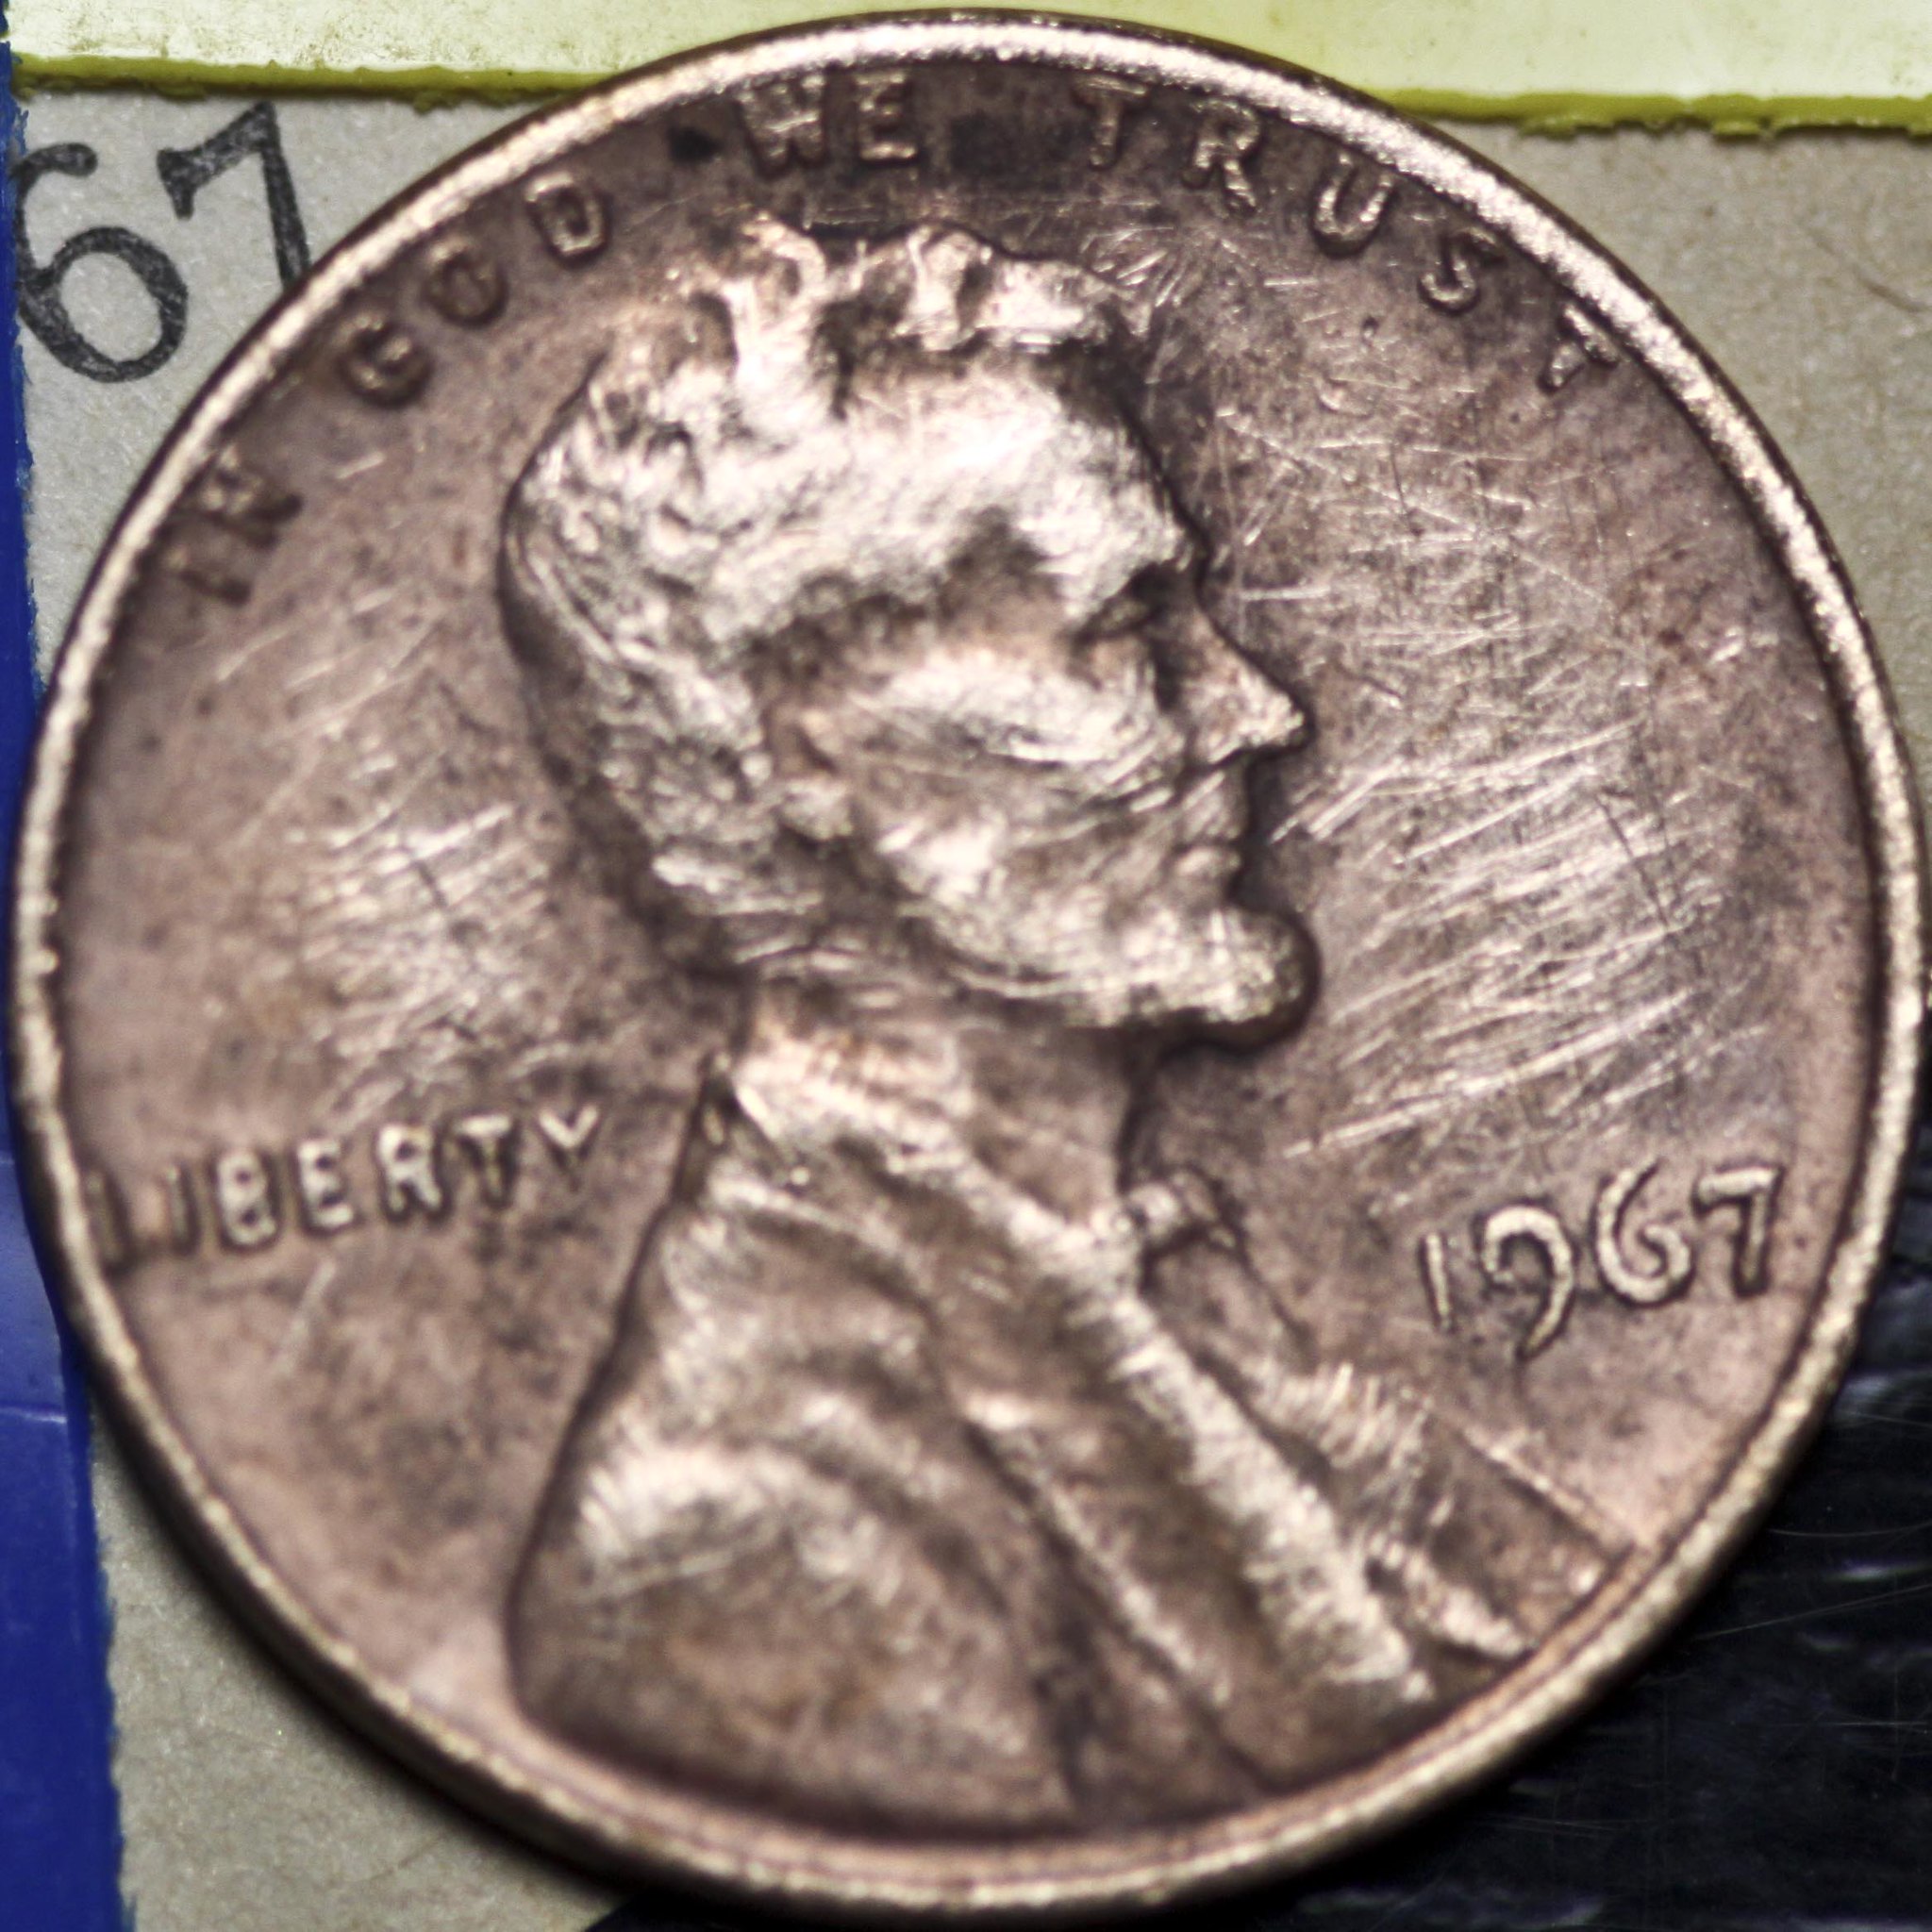 Some 1967 pennies are worth thousands, but all are worth more than face value. how much is yours worth?